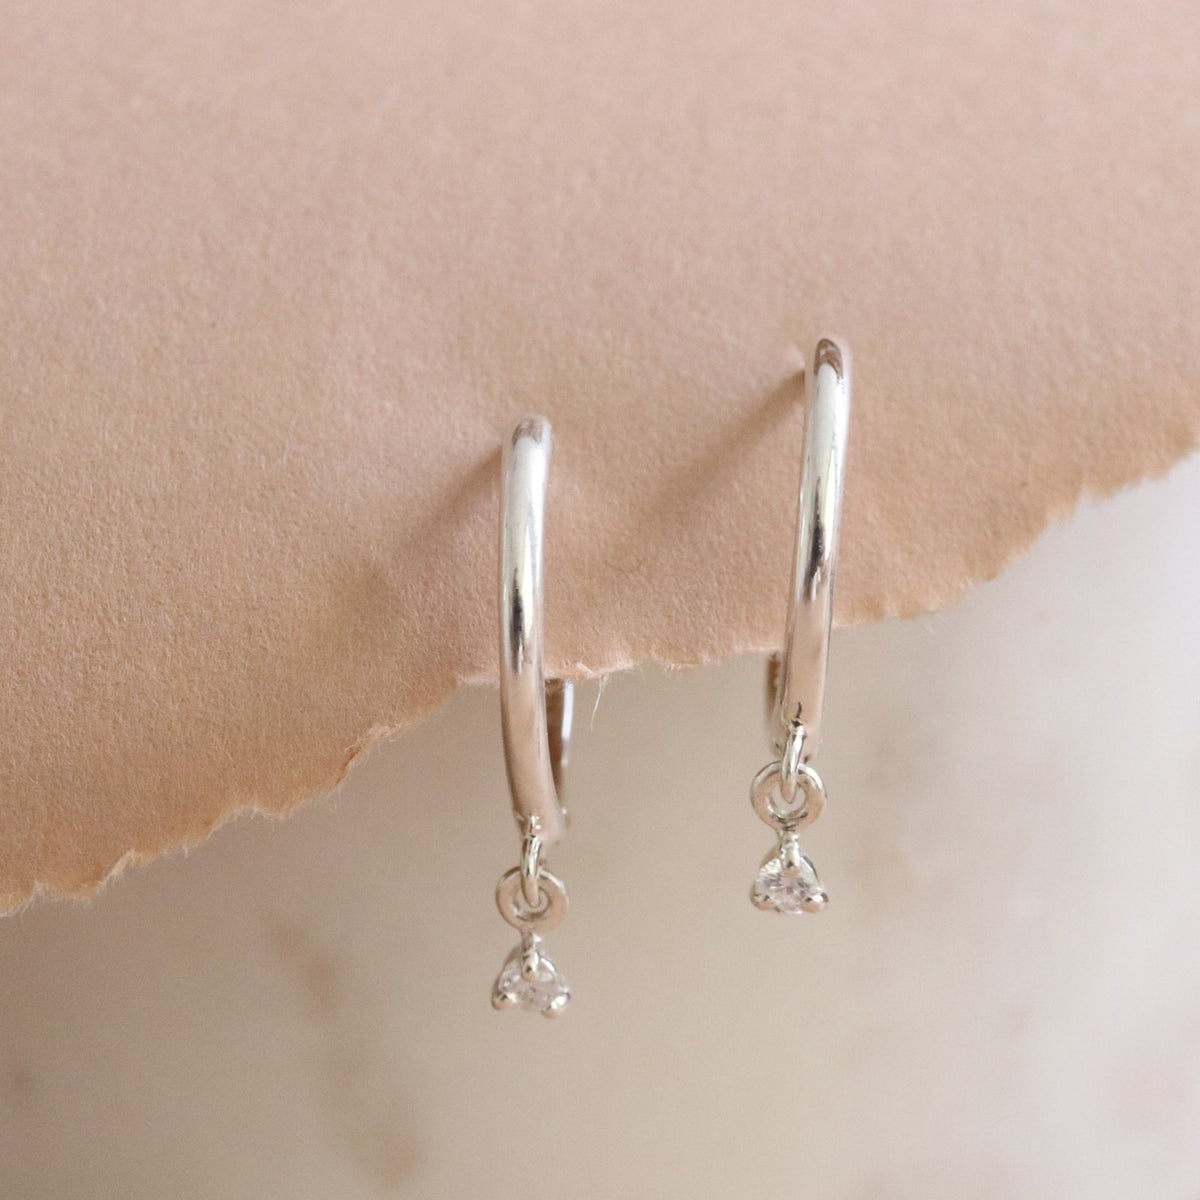 LOVE CHARM HUGGIE HOOPS - CUBIC ZIRCONIA &amp; SILVER - SO PRETTY CARA COTTER